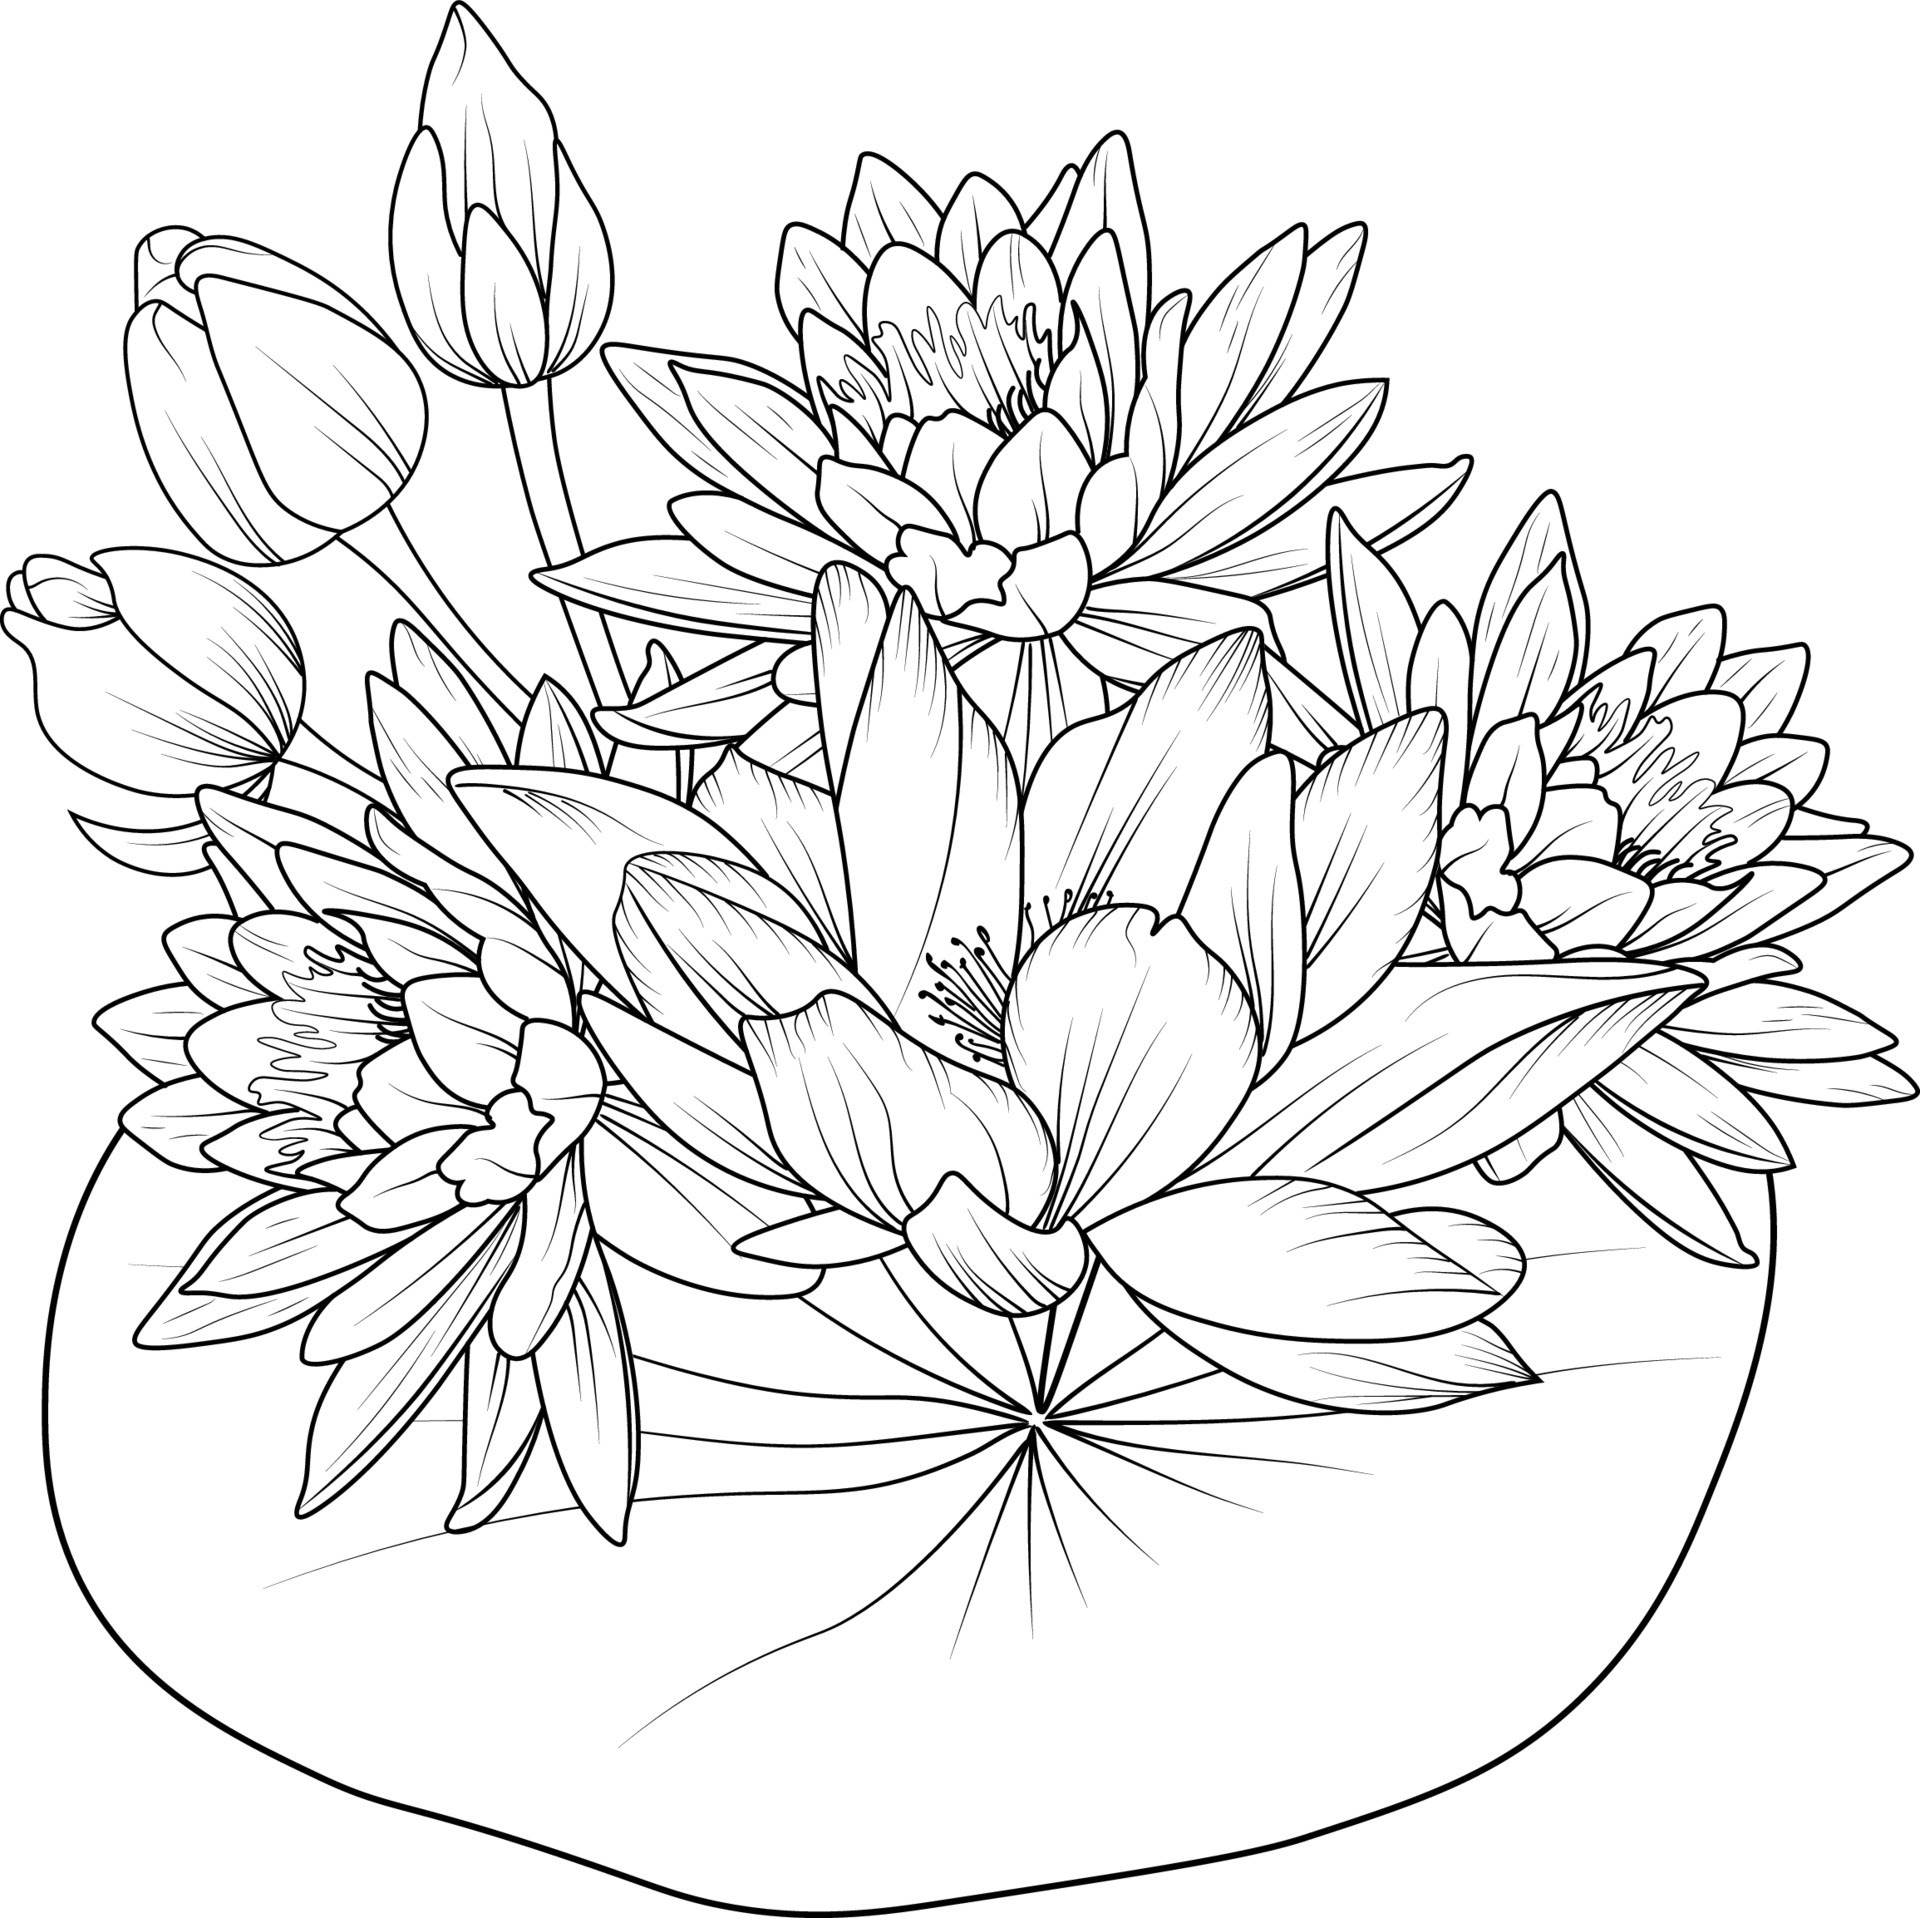 How to Draw Lotus Flower | Pencil Shading Step by Step | Easy Flower Drawing  by Arty's Corner - YouTube | Flower drawing, Easy flower drawings, Pencil  shading